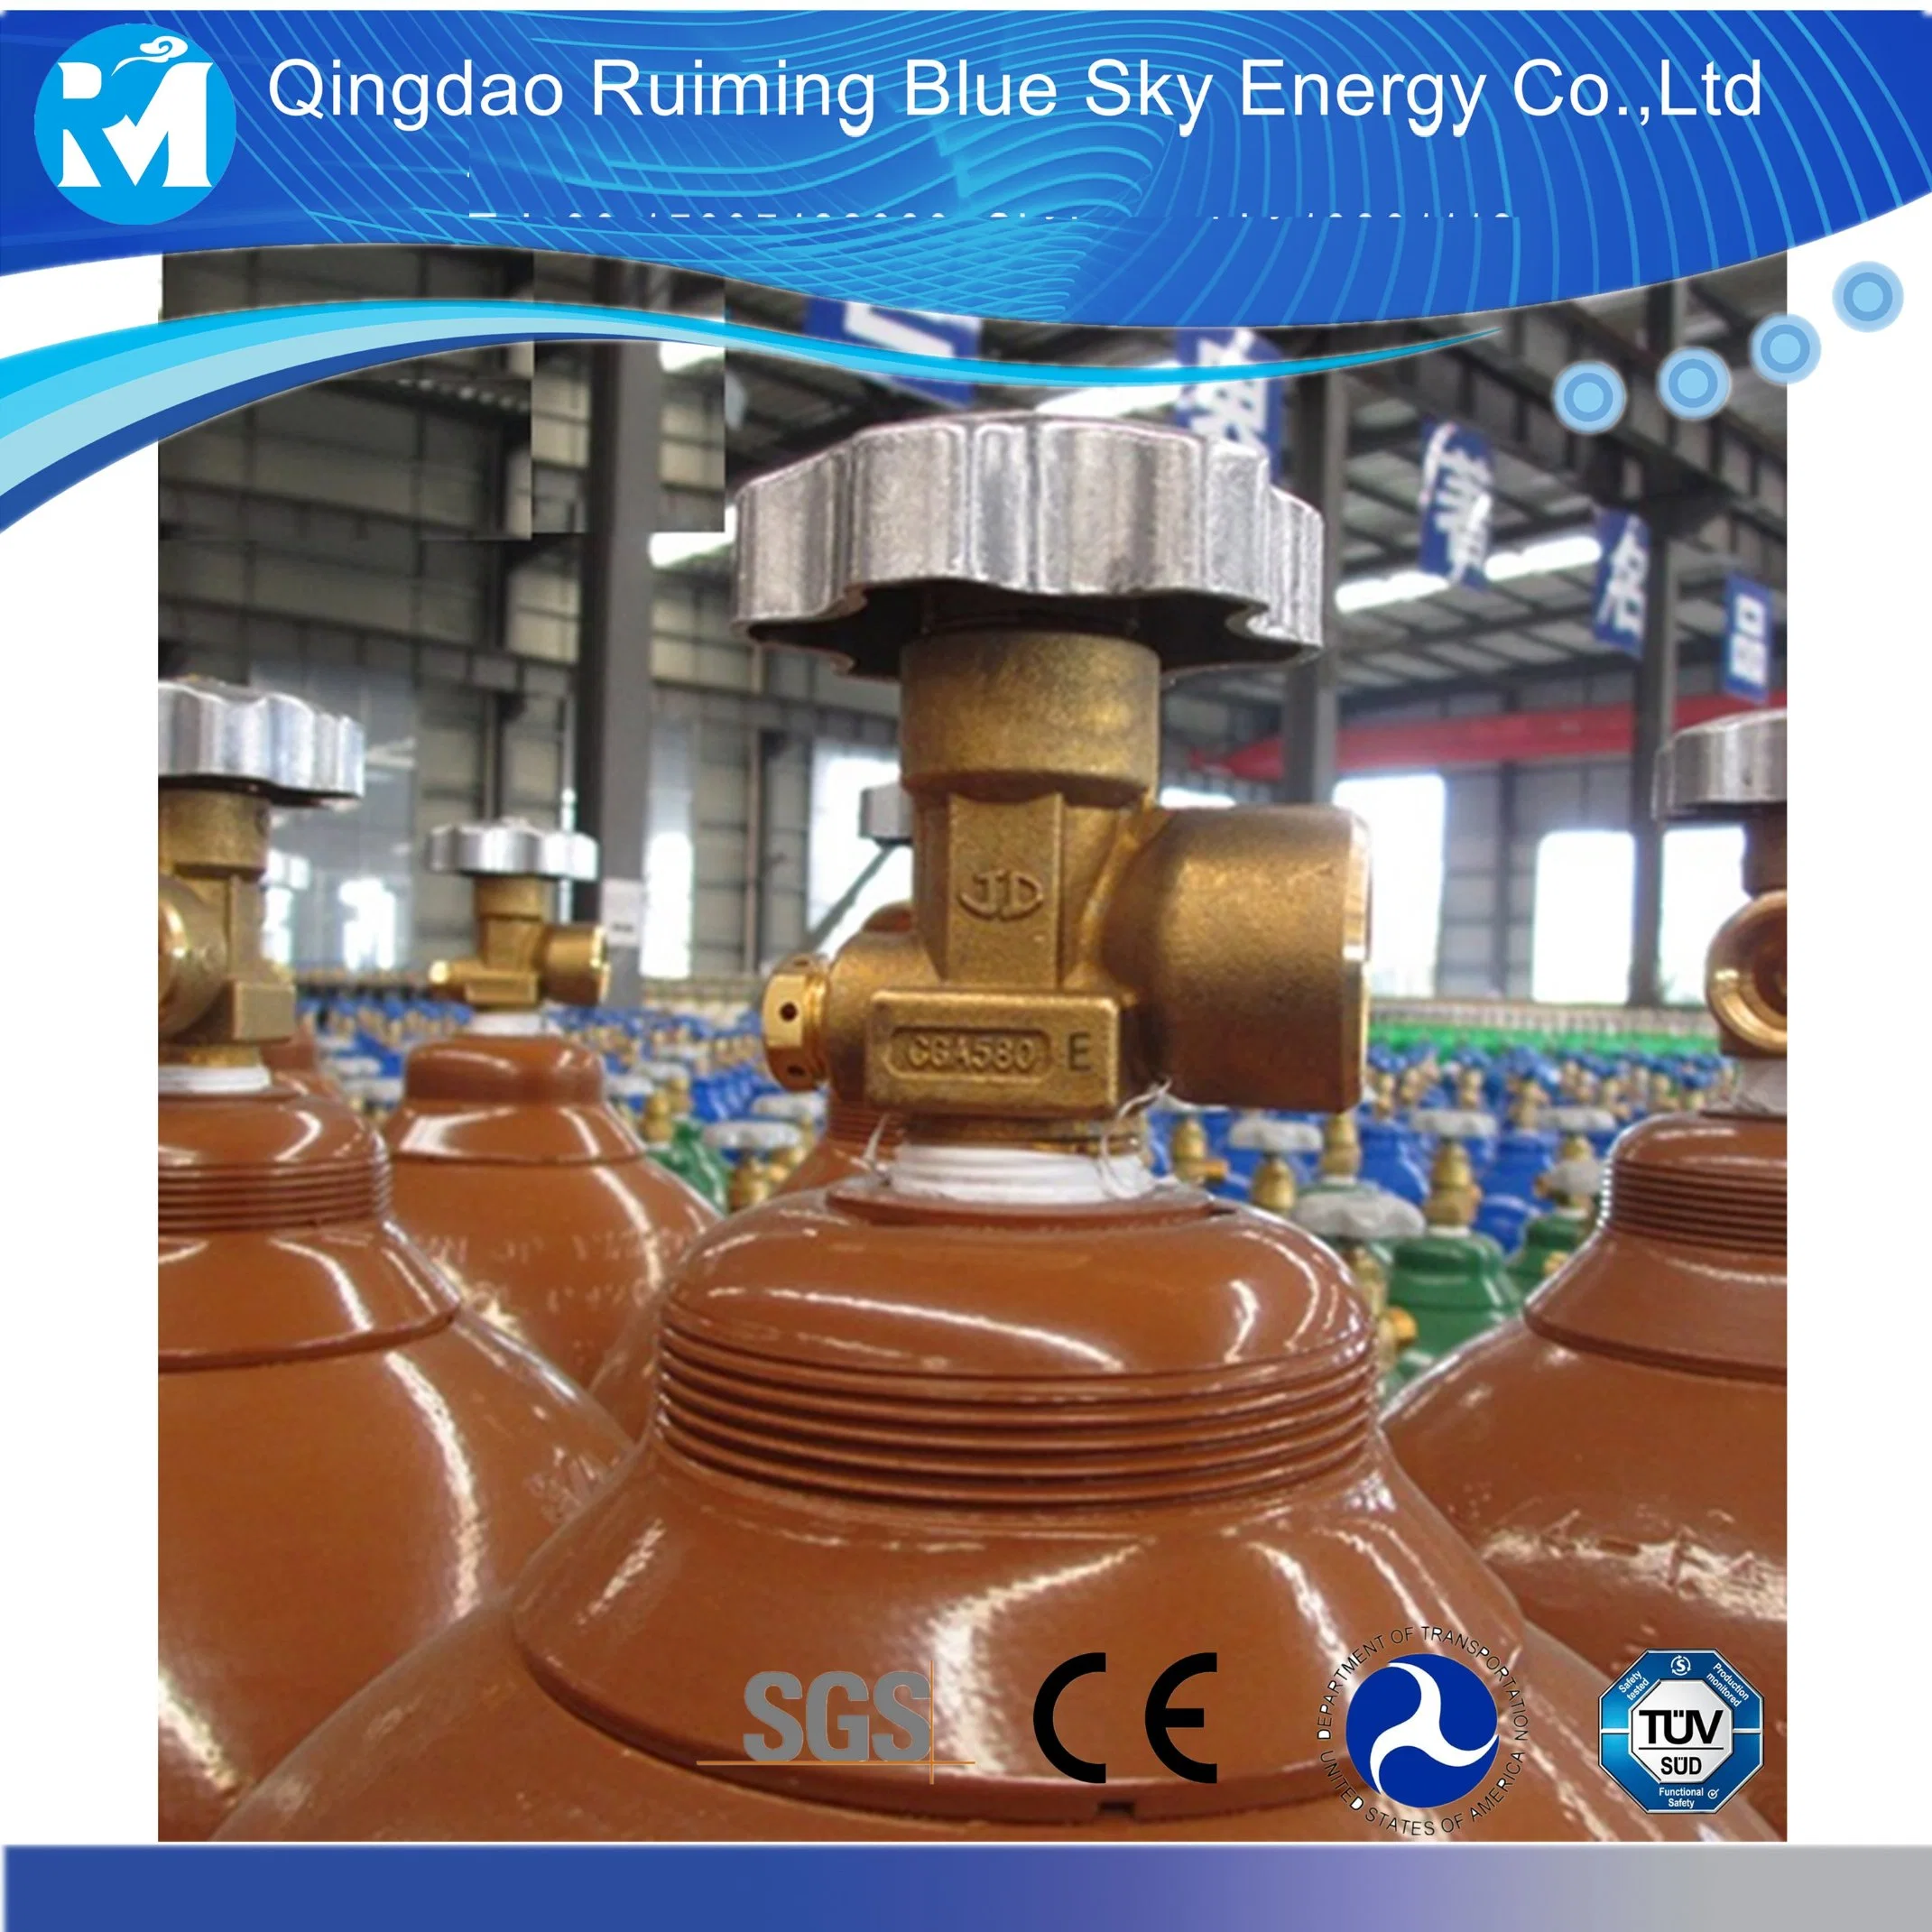 Industrial Grade Non-Flammable Gas RM Cylinders 40L-50L Qingdao, China Cylinder Helium